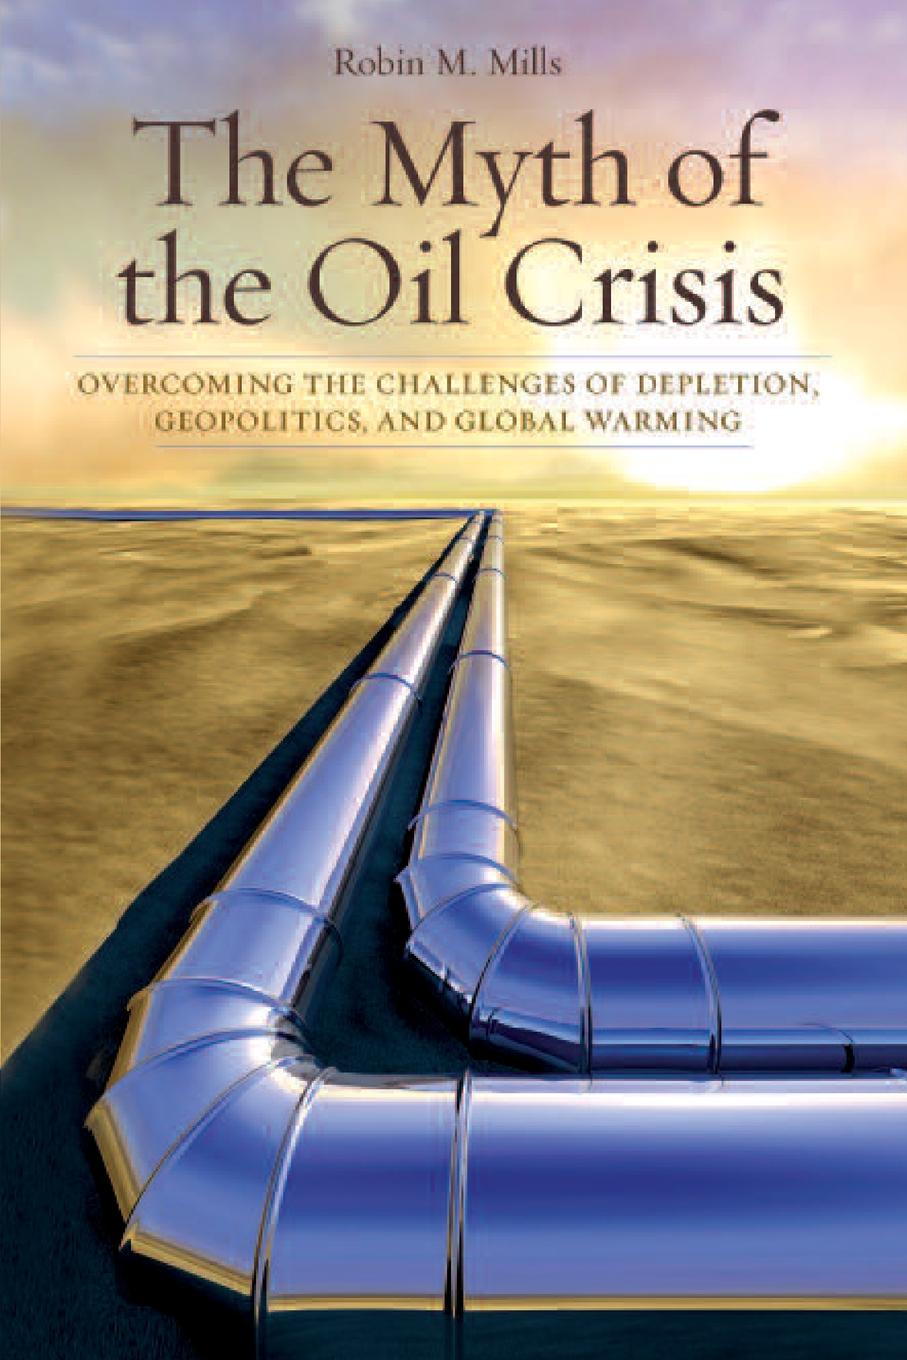 The Myth of the Oil Crisis. Overcoming the Challenges of Depletion, Geopolitics, and Global Warming